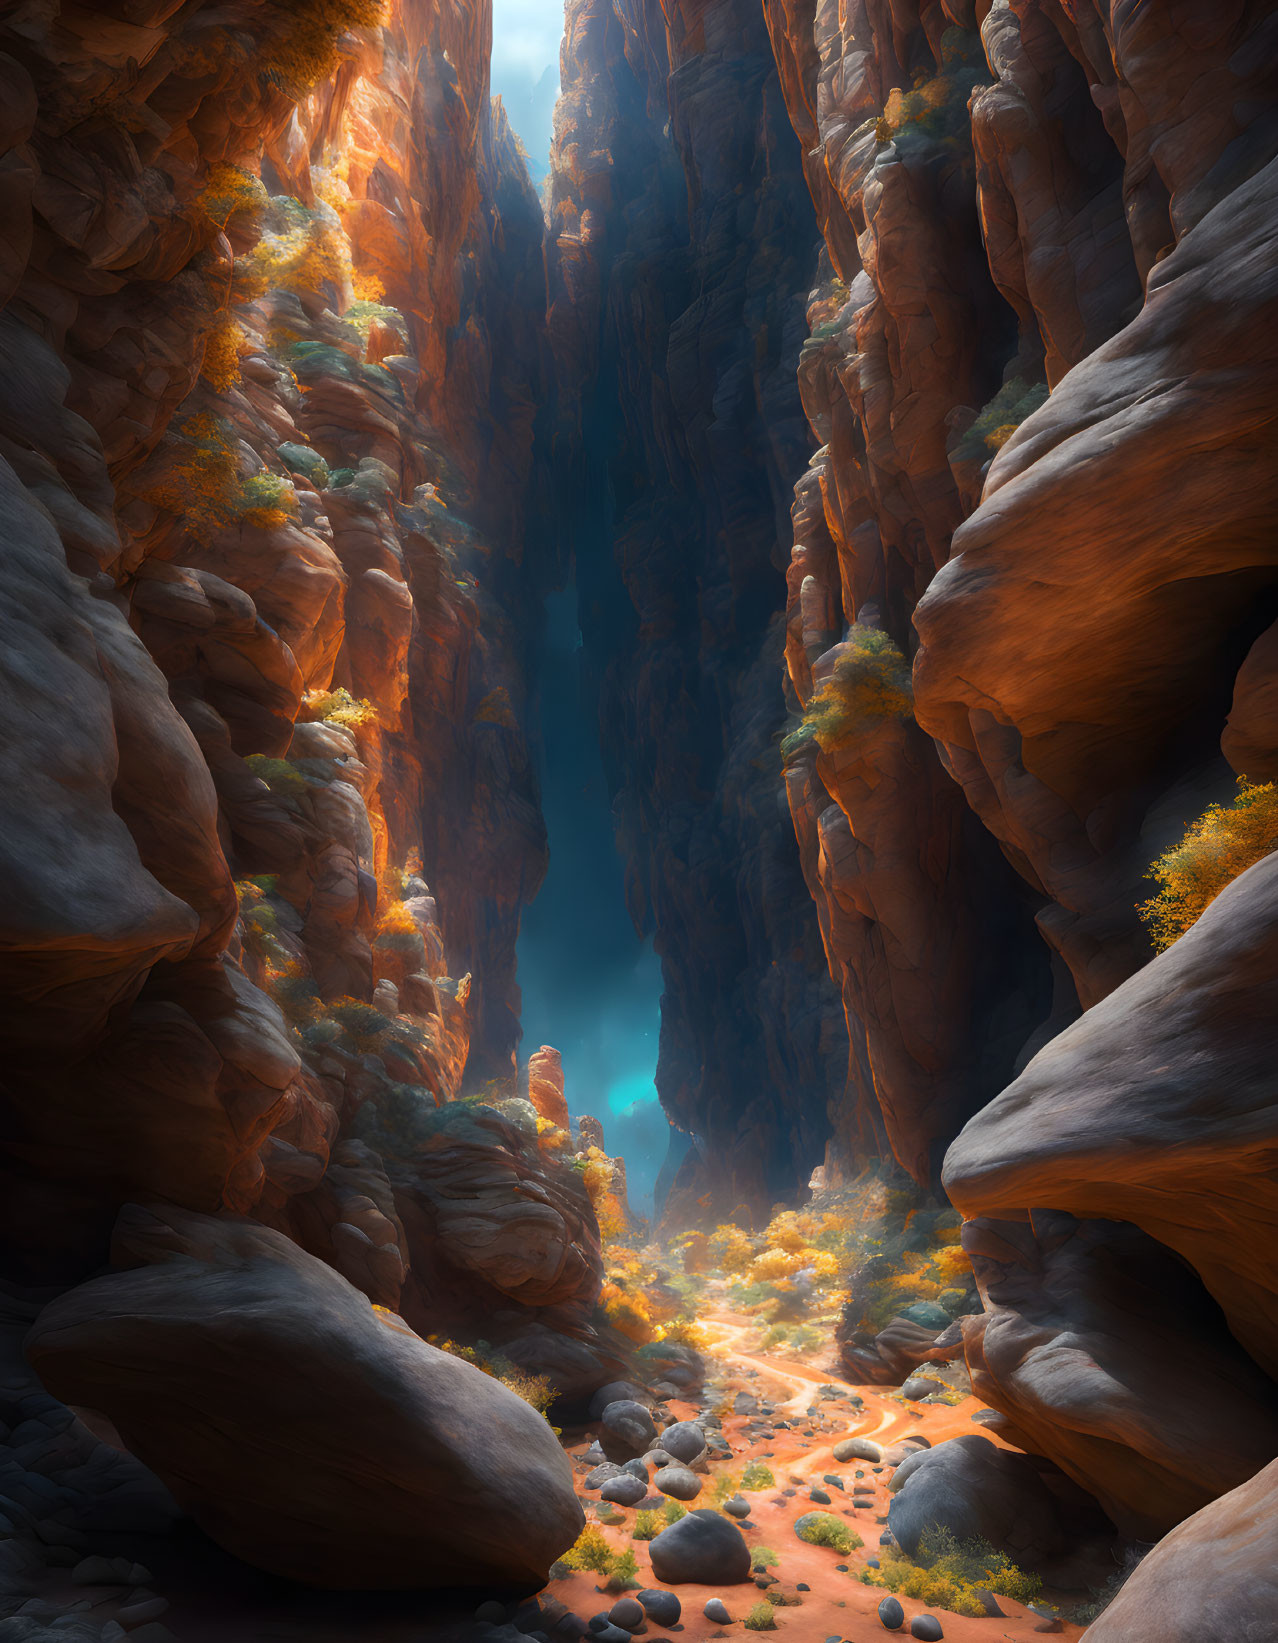 Majestic orange cliffs in narrow canyon with blue glow